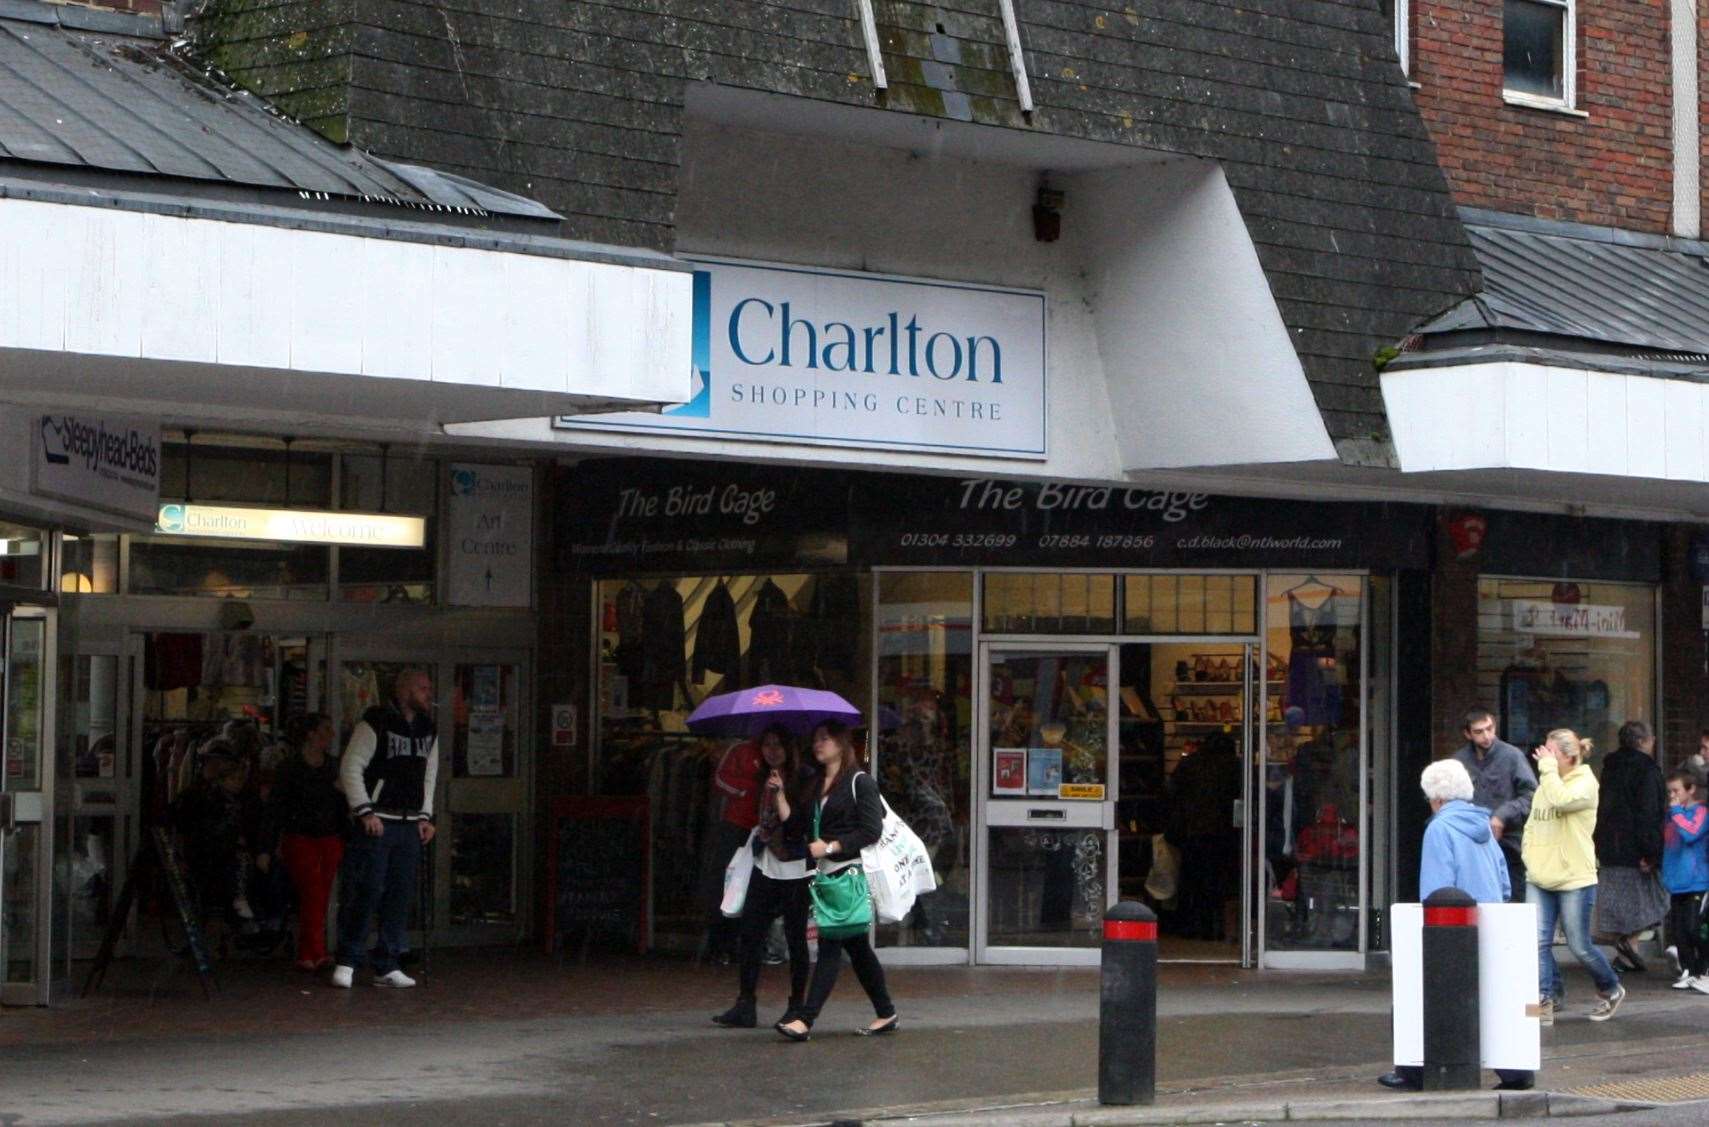 The meeting is at the Charlton Centre